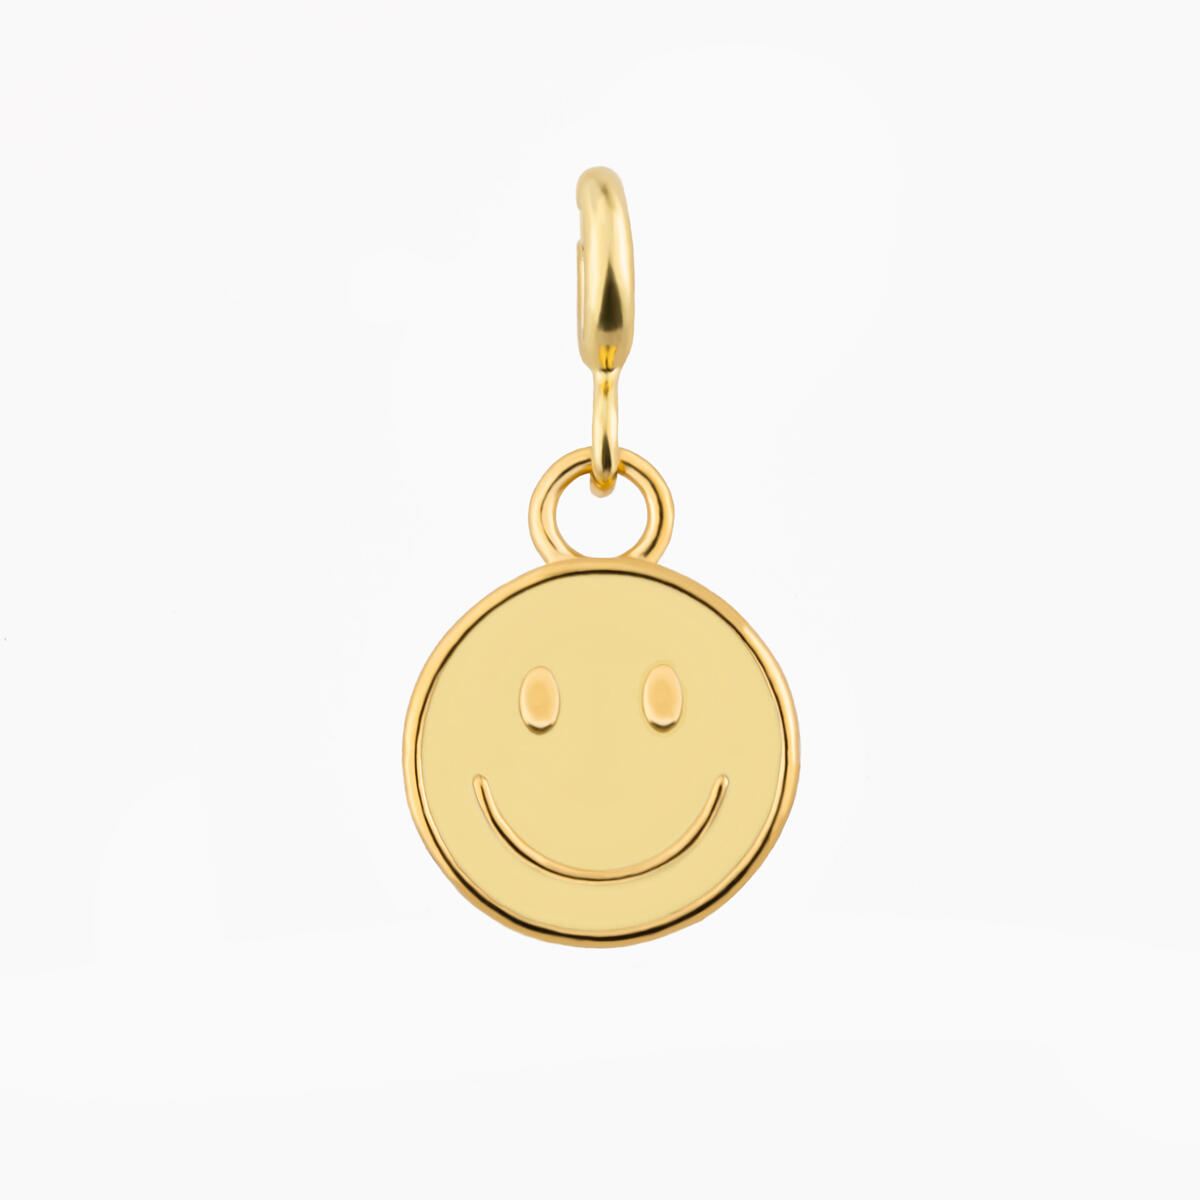 Paeoni Colors - Smiley-Anhänger aus 18k Gold Vermeil, 925 Sterling Silber